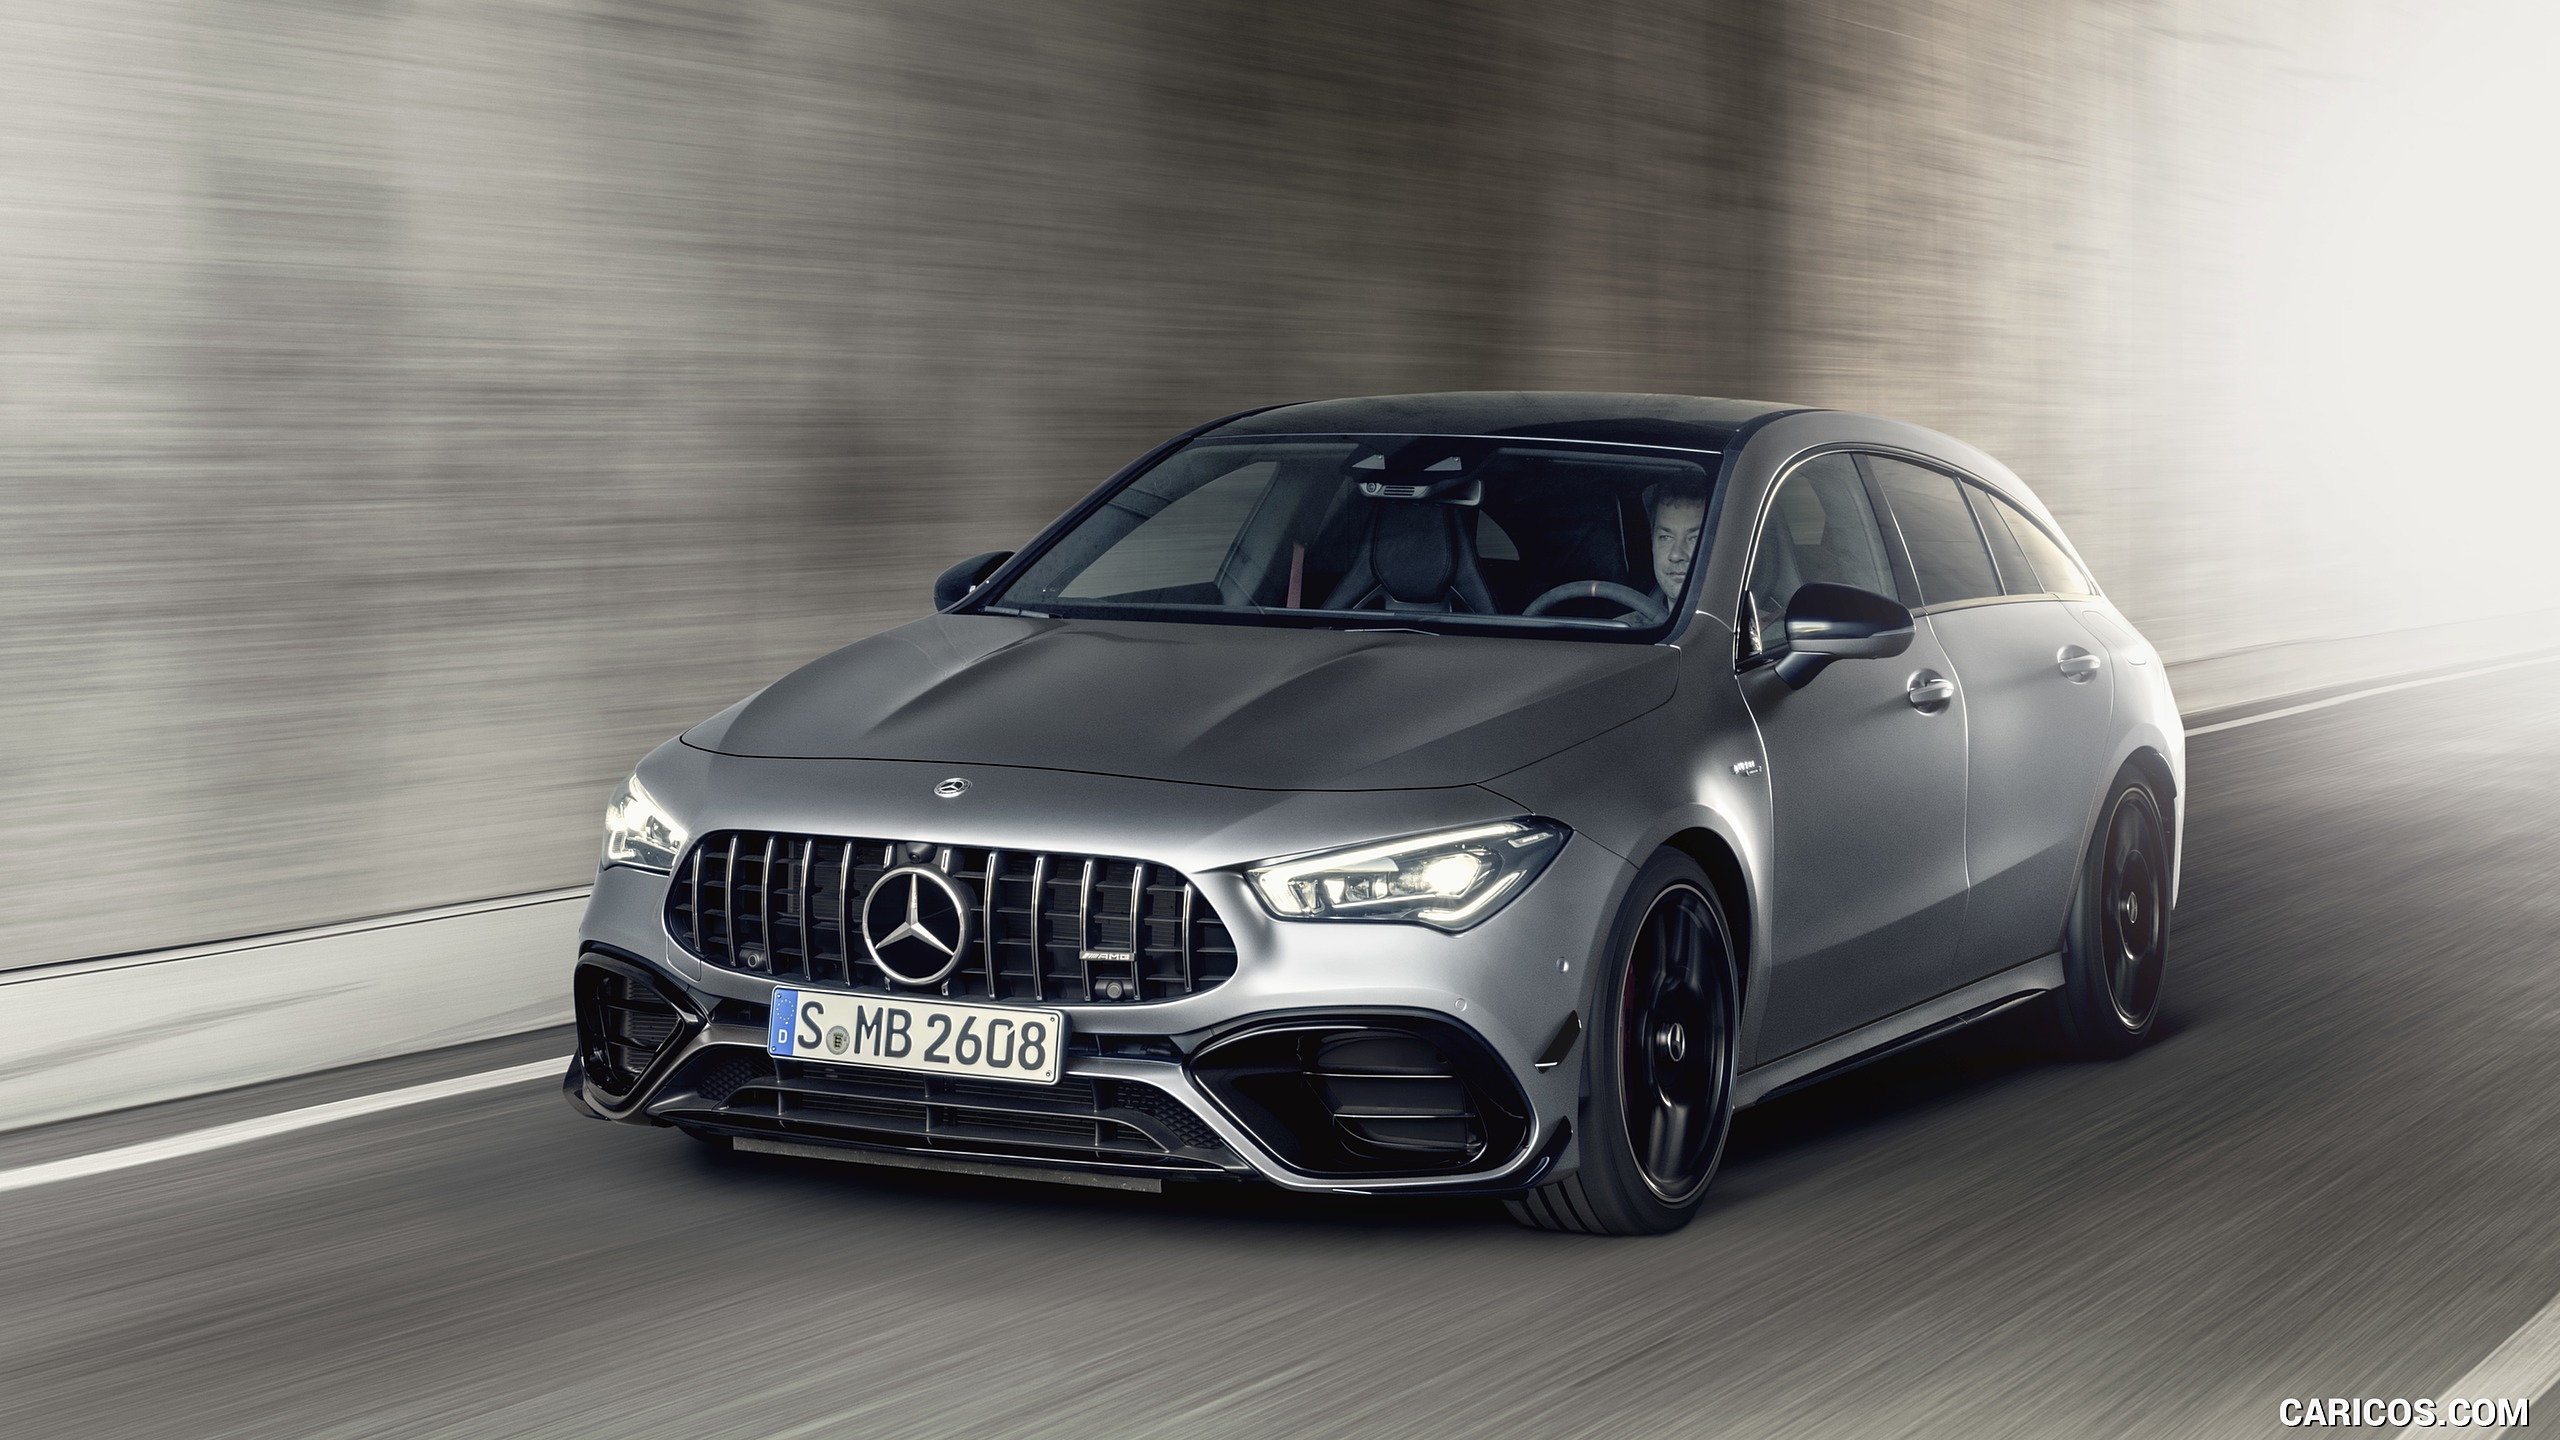 2020 Mercedes-AMG CLA 45 S 4MATIC+ Shooting Brake - Front Three-Quarter, #13 of 35